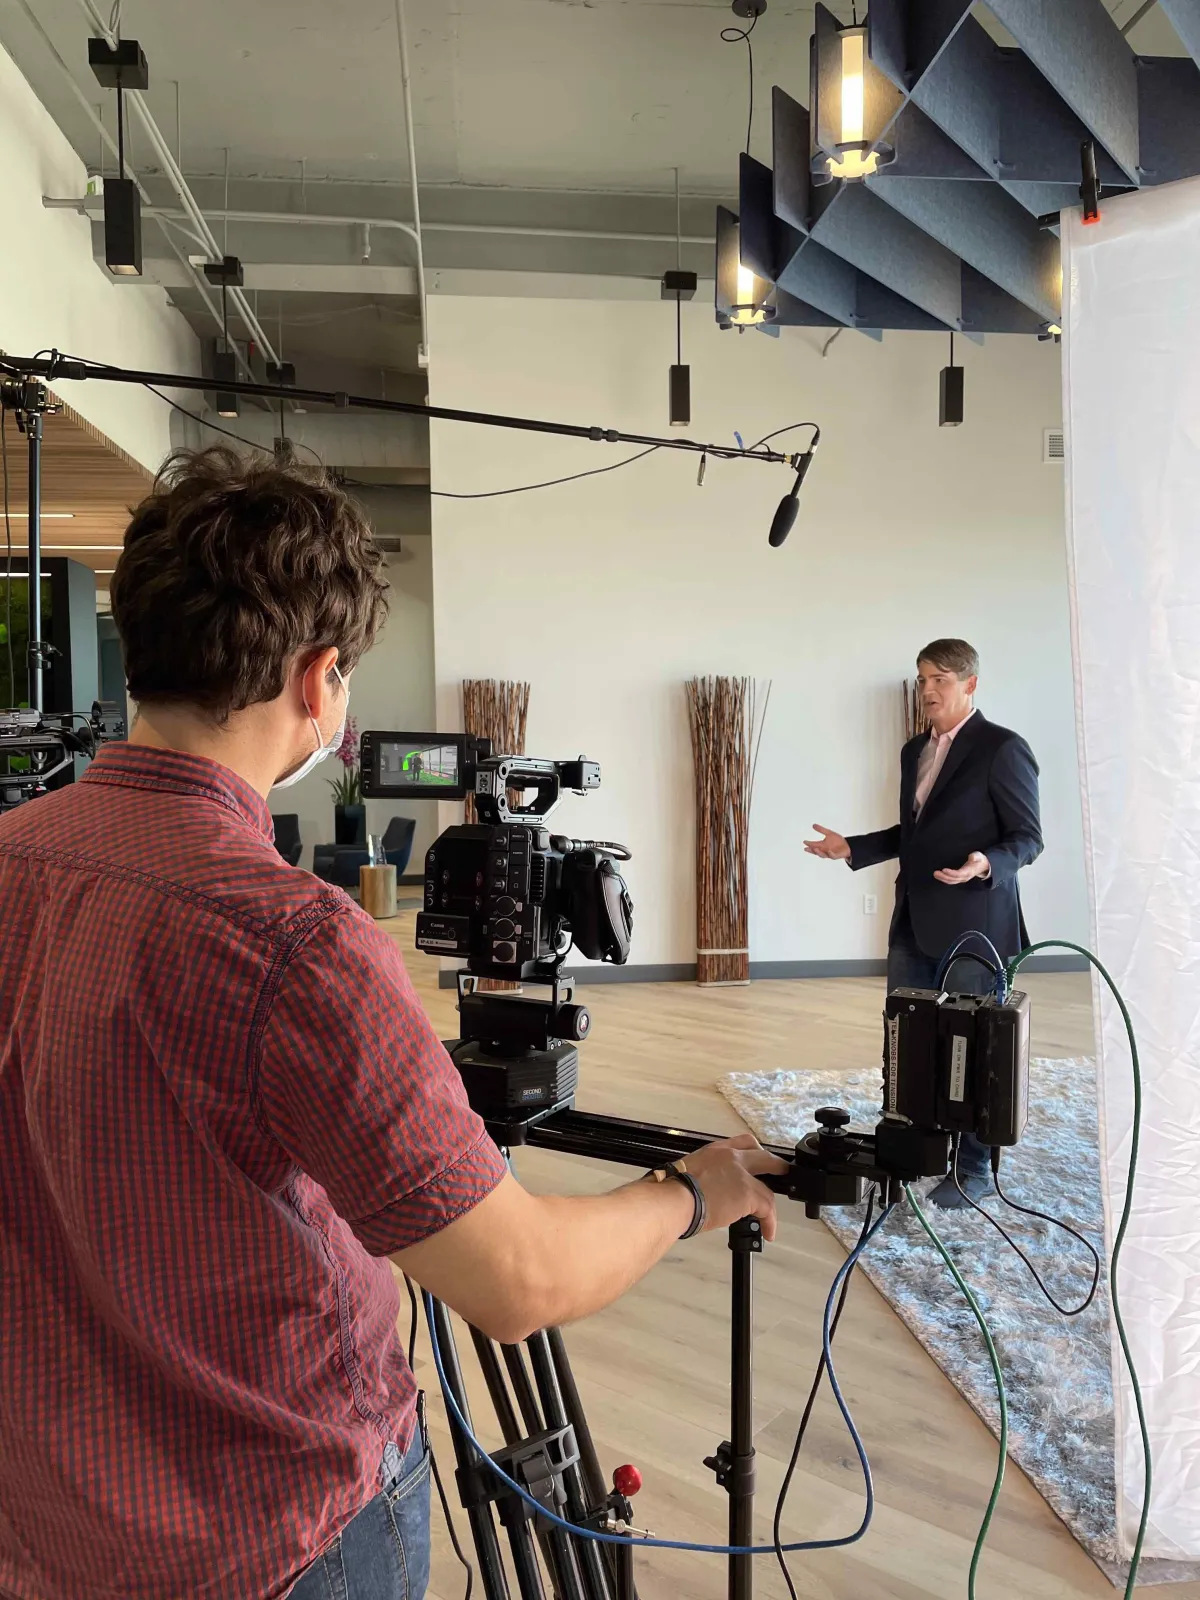 Video production of a customer testimonial with a man in a suit being interview by another man standing behind the professional camera